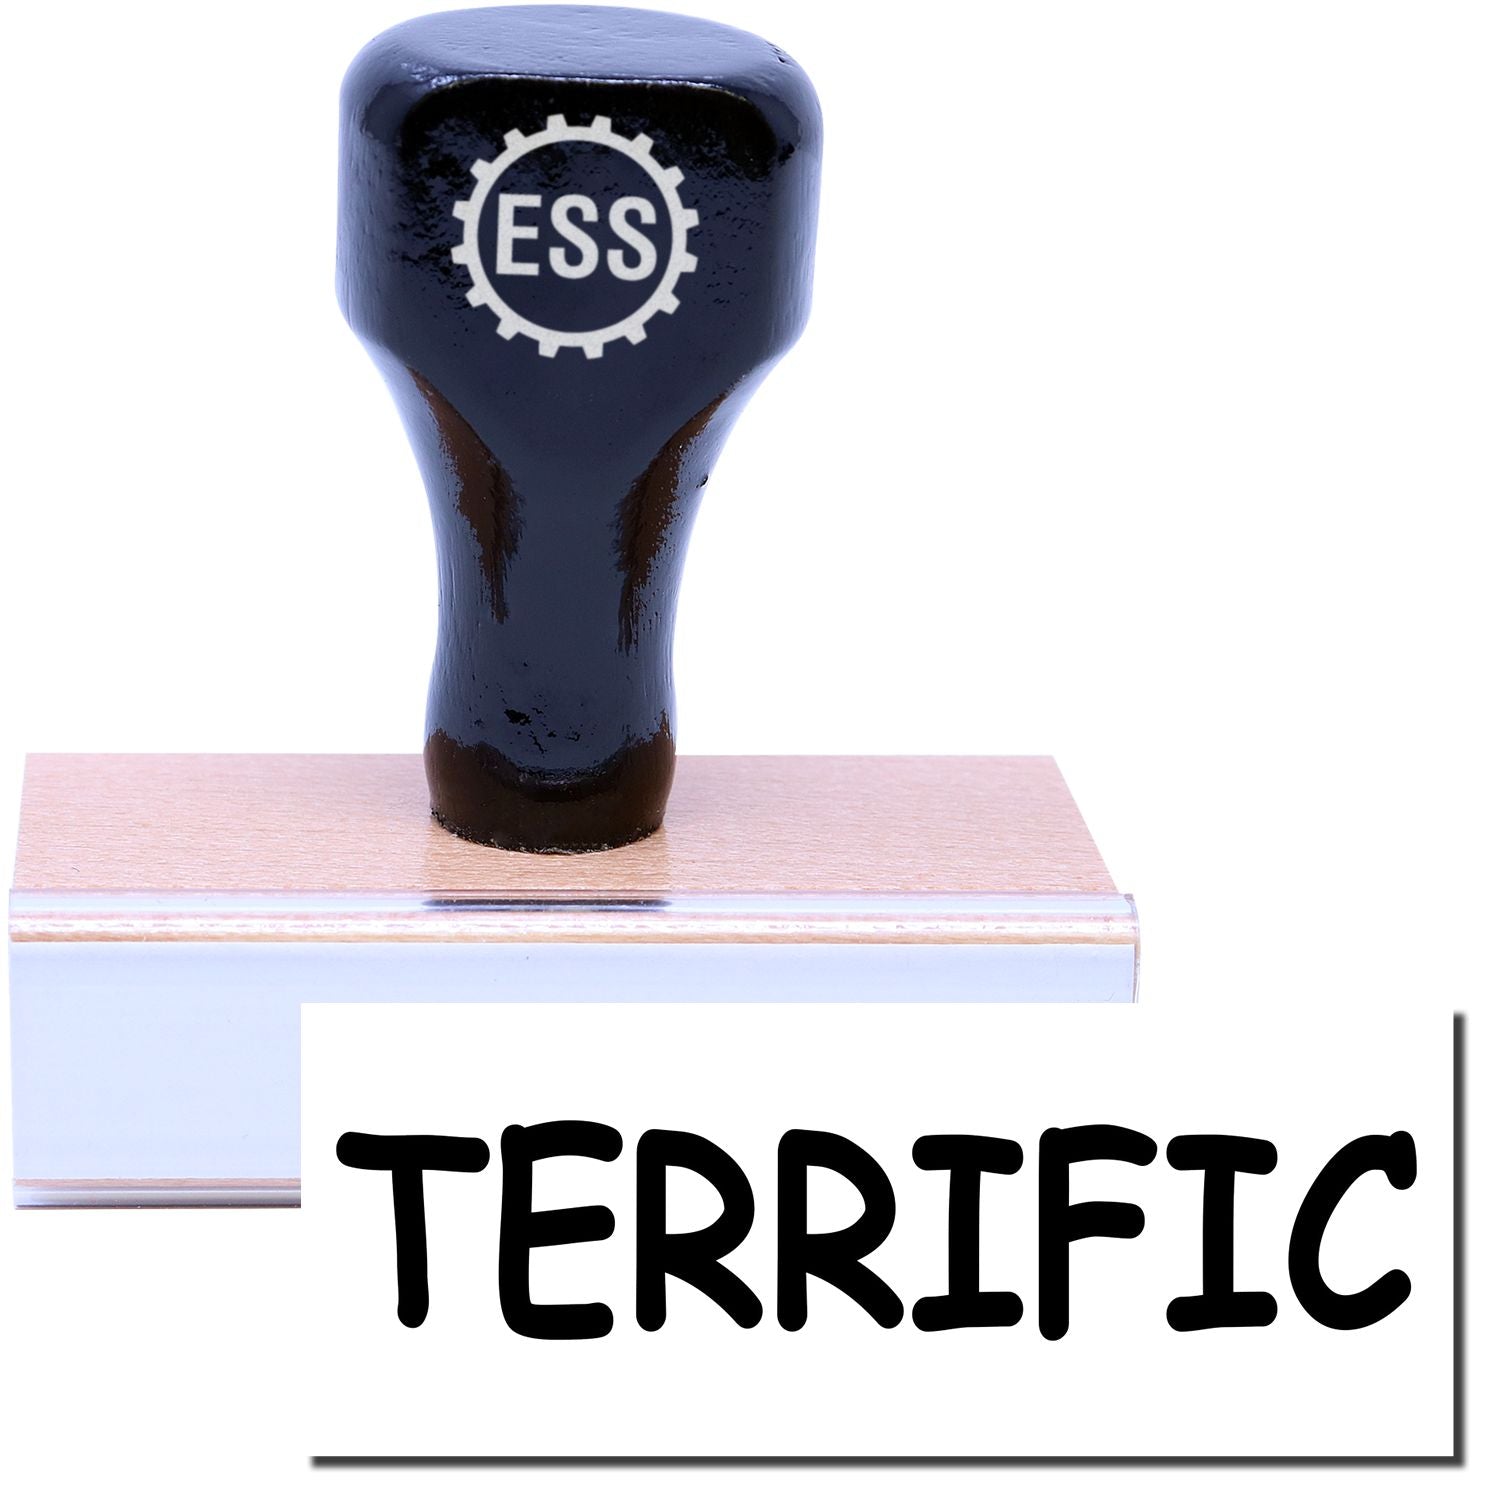 A stock office rubber stamp with a stamped image showing how the text "TERRIFIC" in a large font is displayed after stamping.